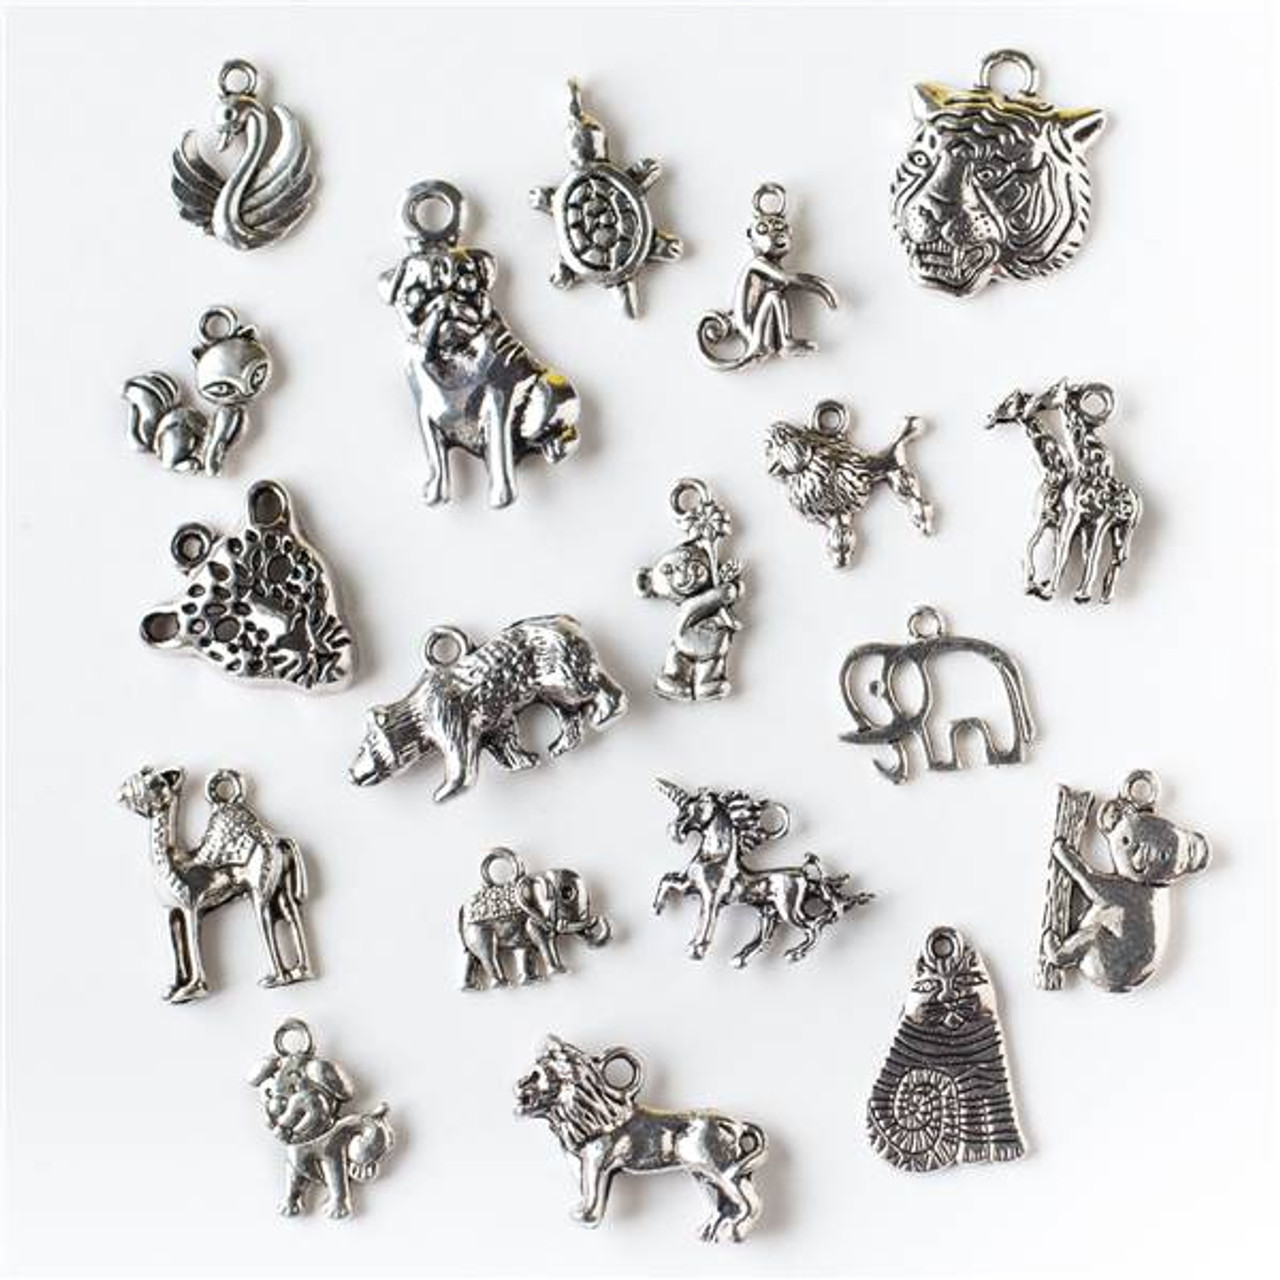 An Assorted Mix of 25 Silver Animal Charms